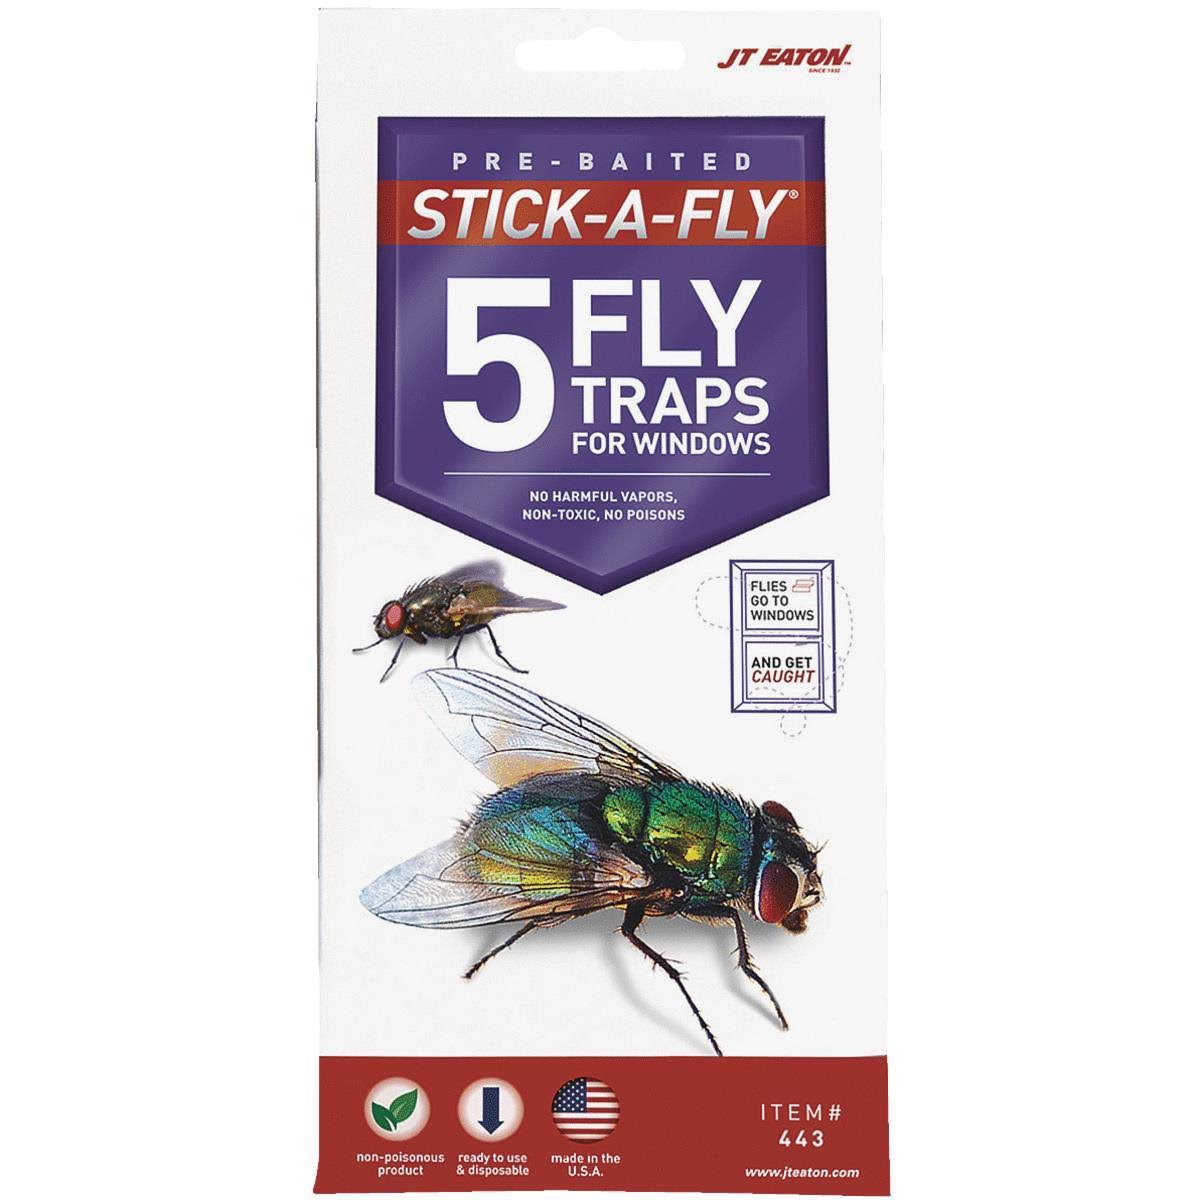 JT Eaton Stick-A-Fly Window Fly Traps - 5 Pack